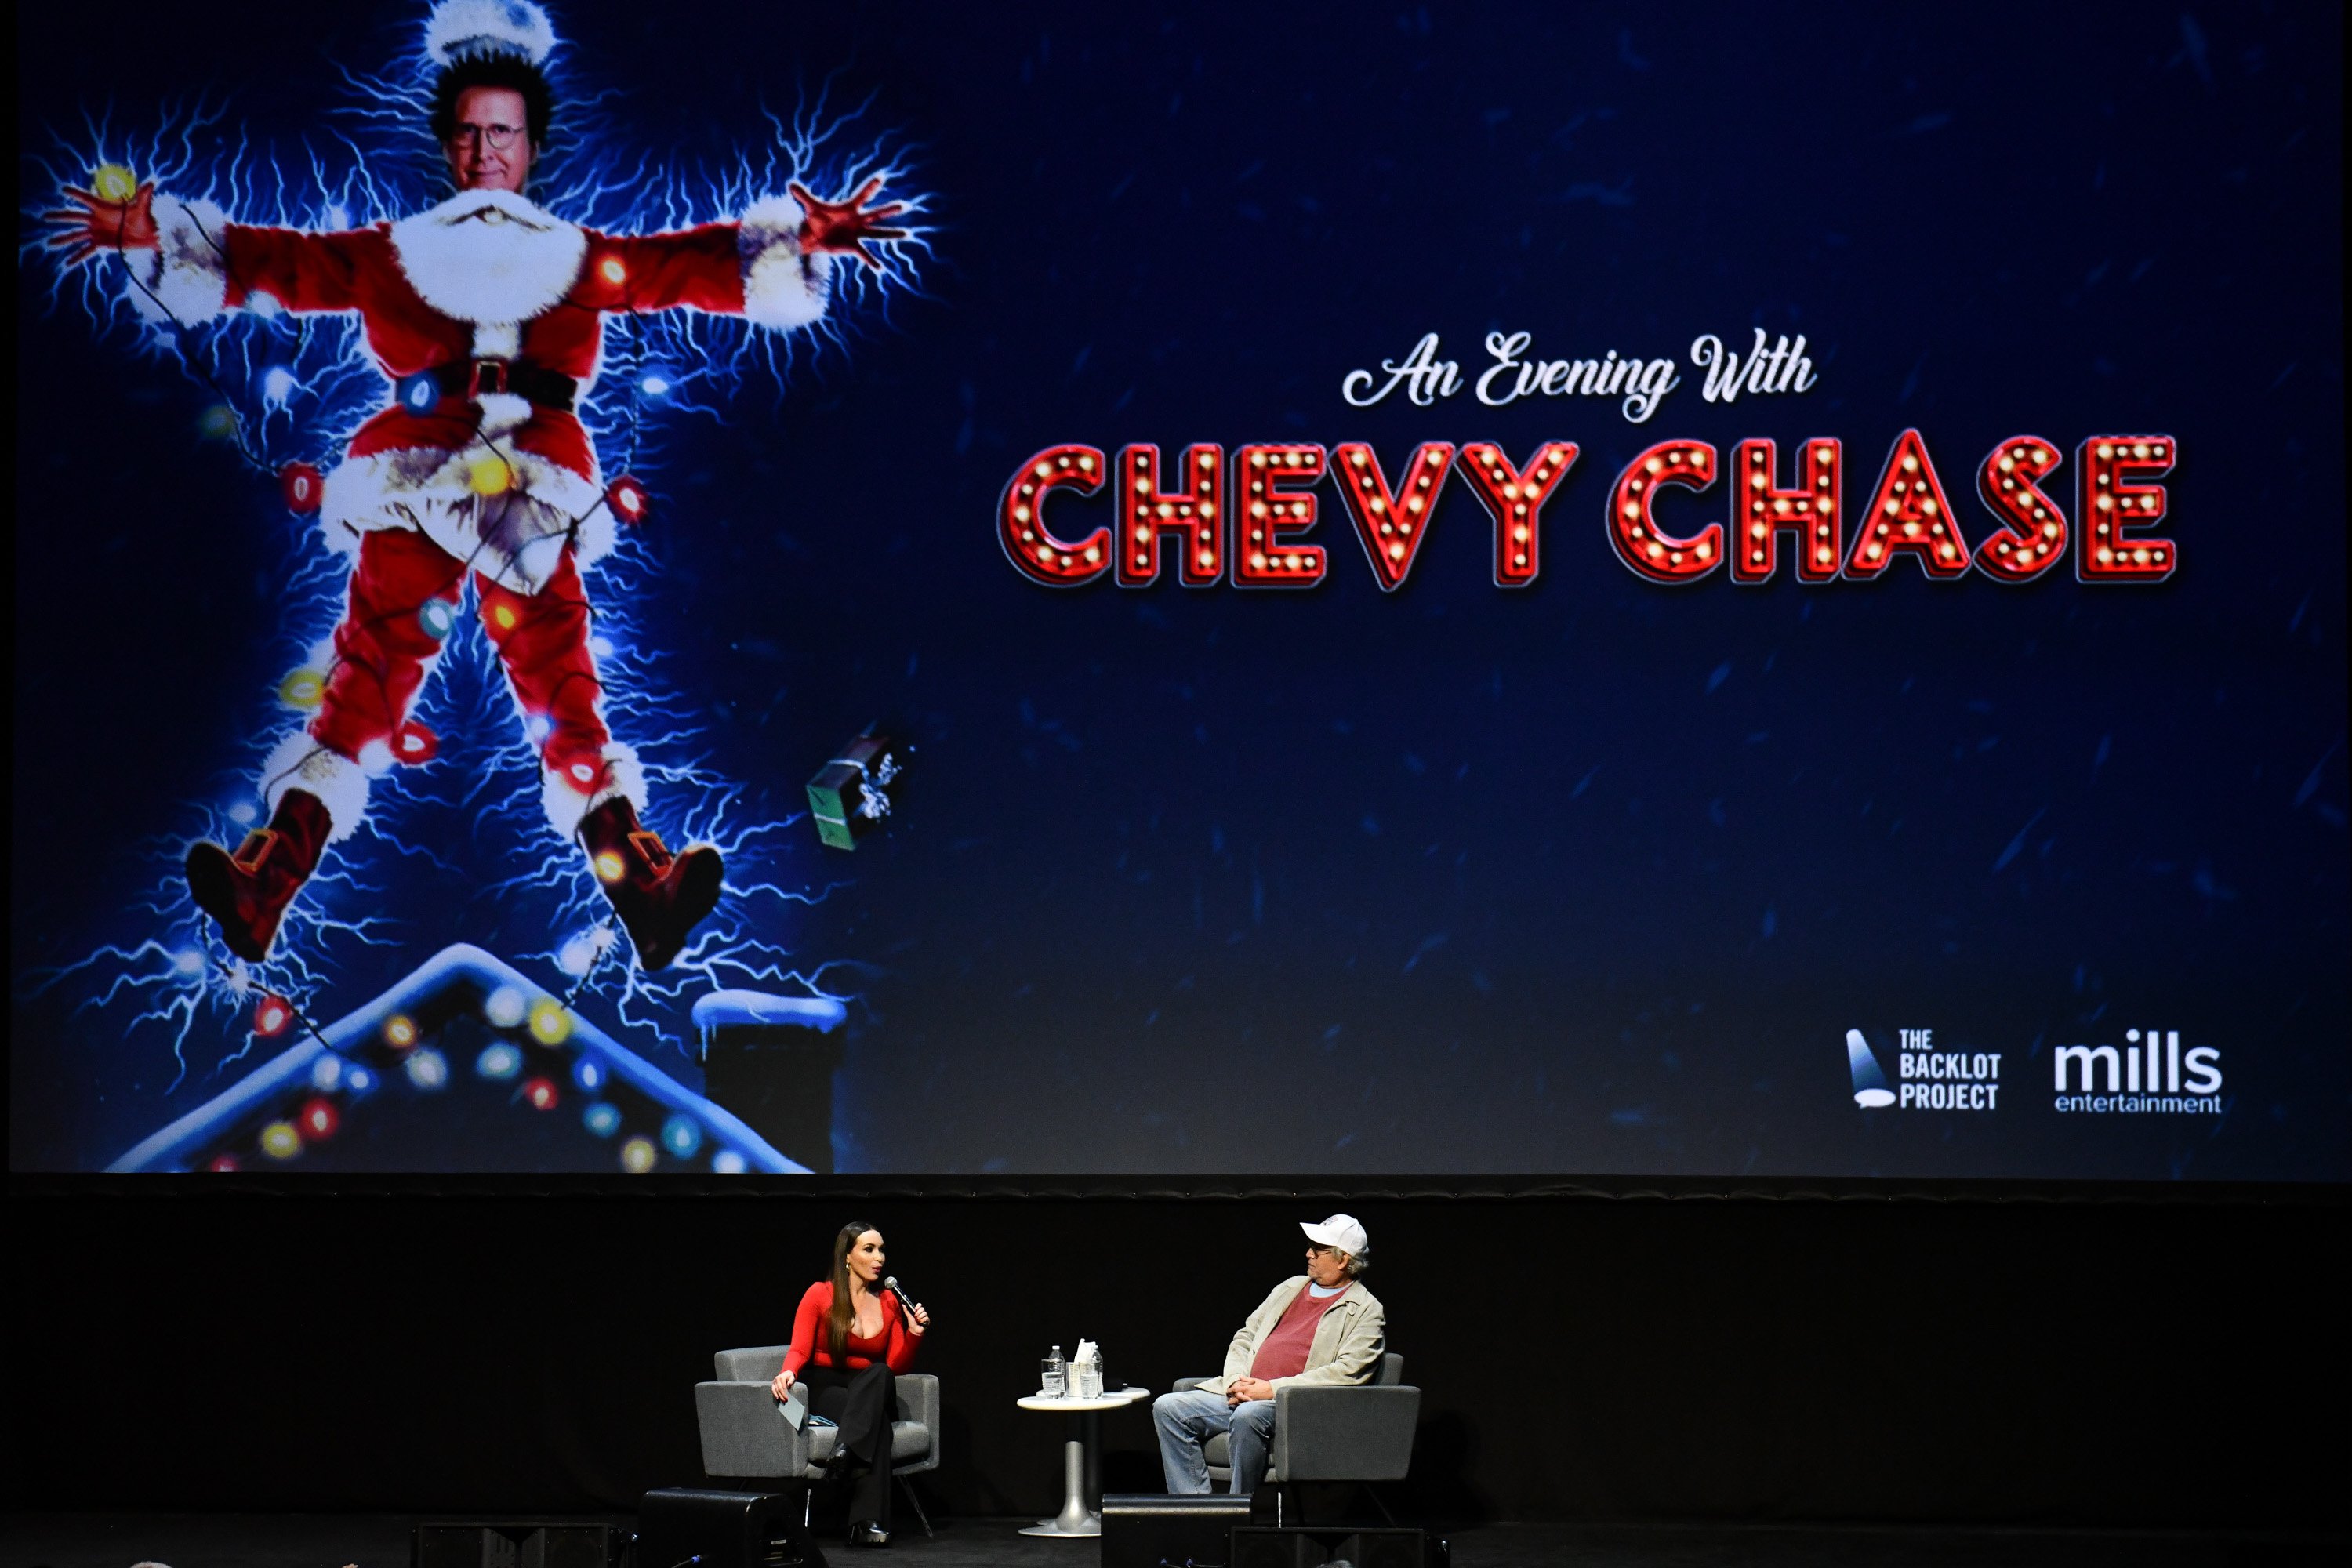 Chevy Chase of 'National Lampoon's Christmas Vacation' speaks with moderator Yenitza Munoz